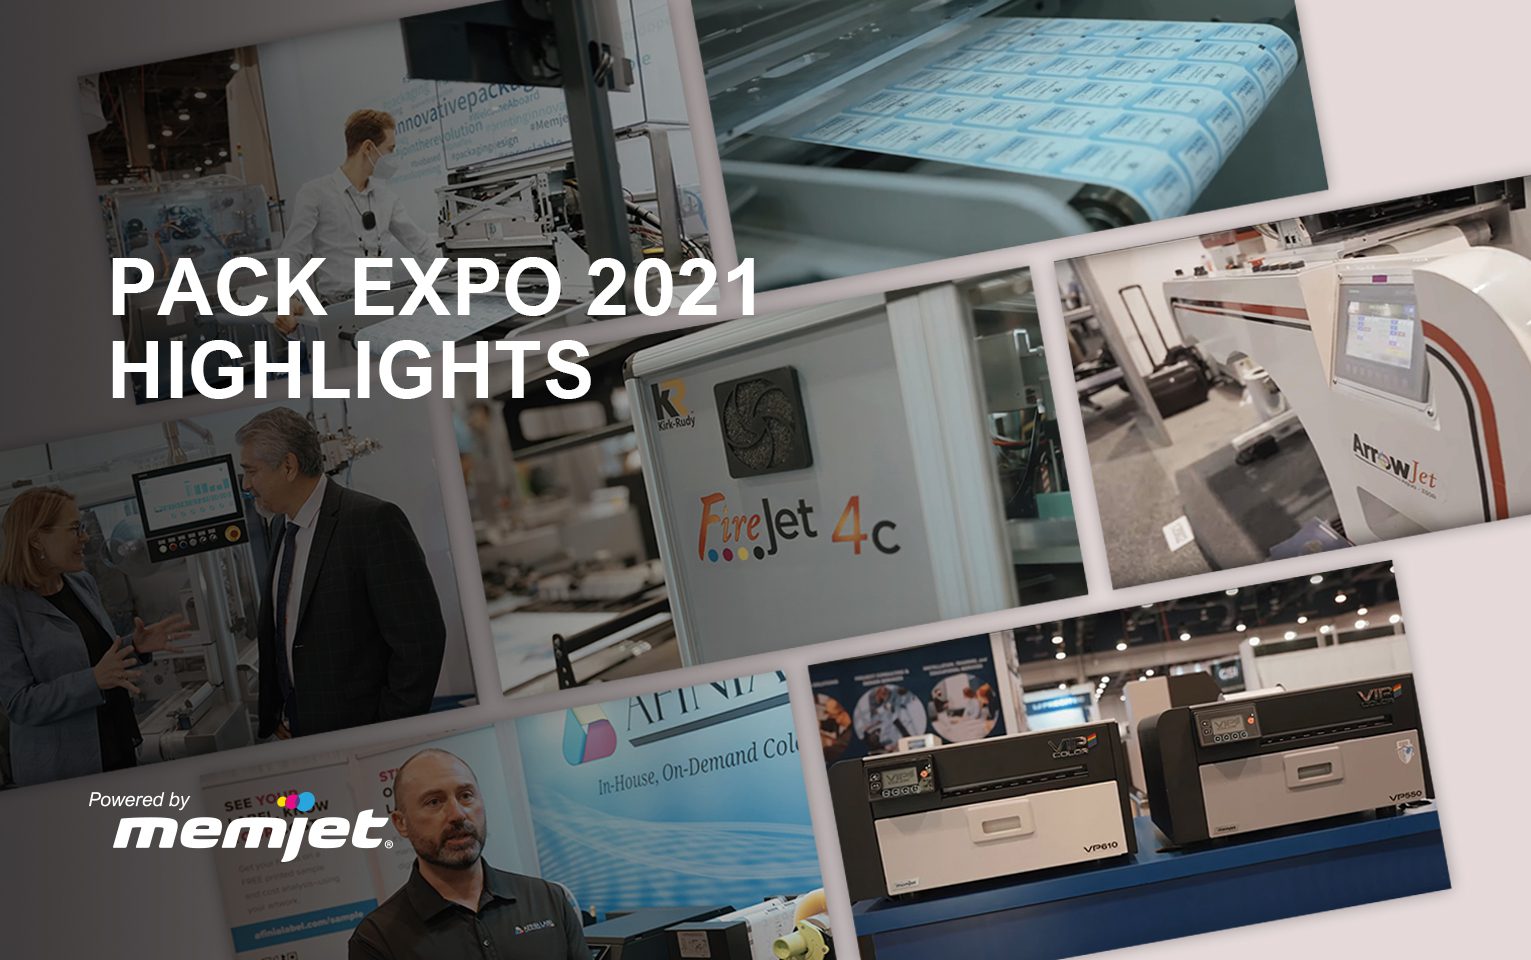 PACK EXPO 2021 HIGHLIGHTS